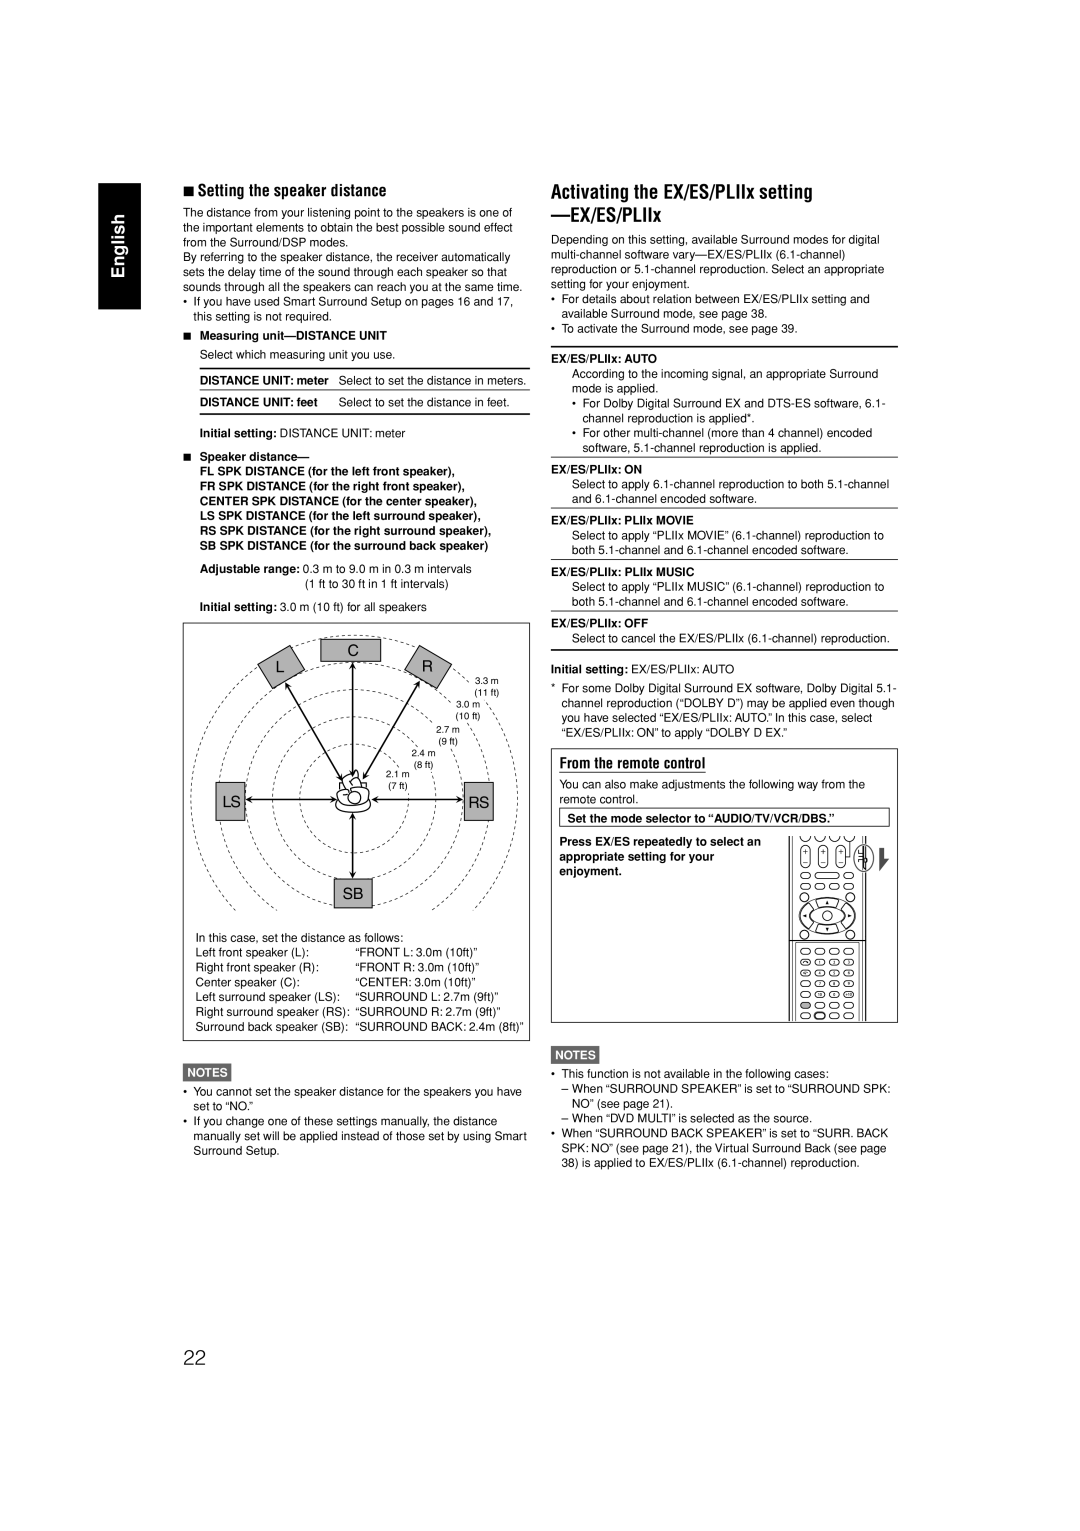 JVC RX-F31S manual English, 7Setting the speaker distance, C L Ls Sb, From the remote control, Notes 